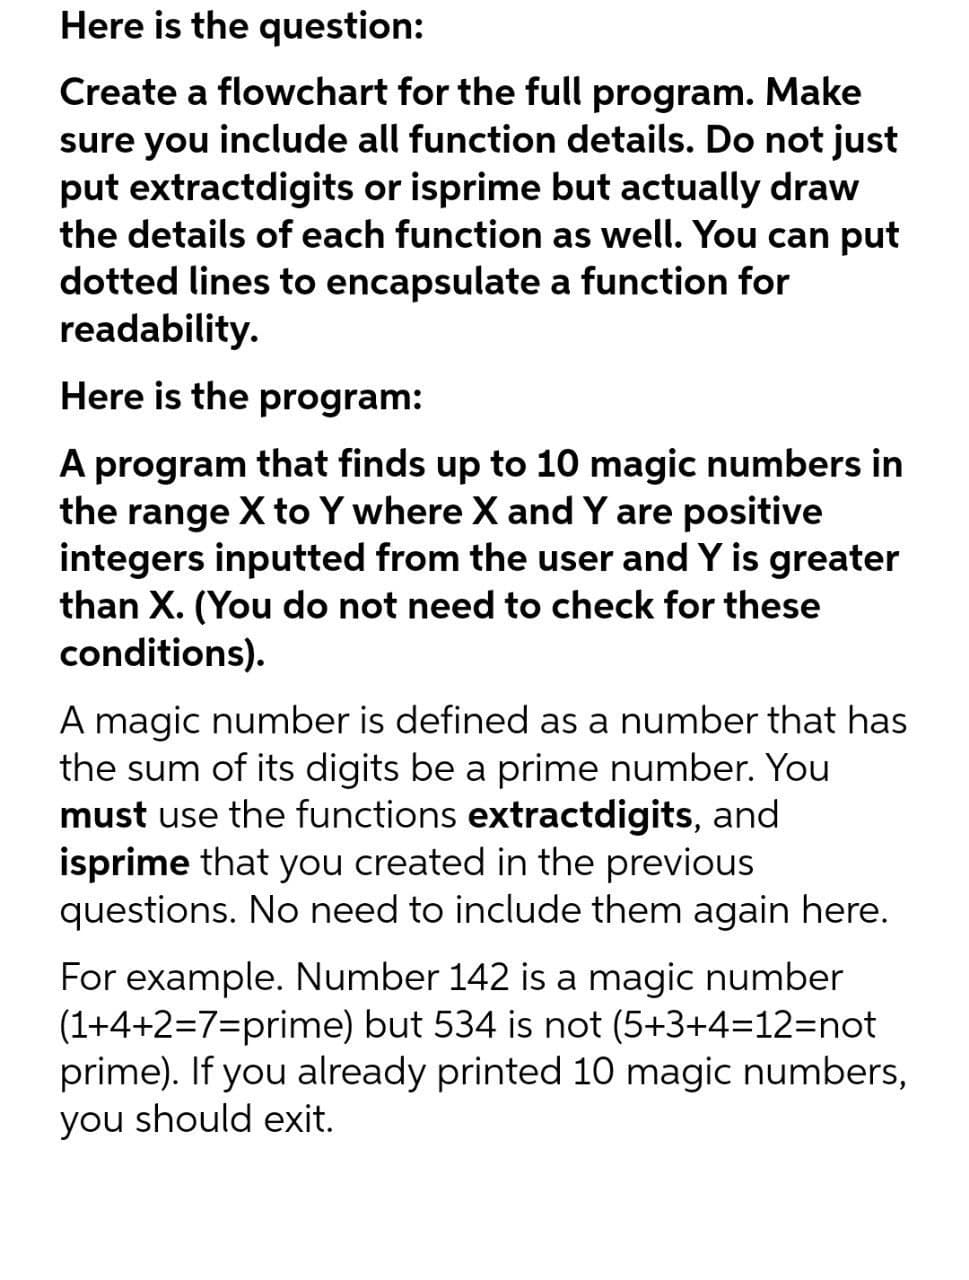 Here is the question:
Create a flowchart for the full program. Make
sure you
include all function details. Do not just
put extractdigits or isprime but actually draw
the details of each function as well. You can put
dotted lines to encapsulate a function for
readability.
Here is the program:
A program that finds up to 10 magic numbers in
the range X to Y where X and Y are positive
integers inputted from the user and Y is greater
than X. (You do not need to check for these
conditions).
A magic number is defined as a number that has
the sum of its digits be a prime number. You
must use the functions extractdigits, and
isprime that you created in the previous
questions. No need to include them again here.
For example. Number 142 is a magic number
(1+4+2=7=prime) but 534 is not (5+3+4=12=not
prime). If you already printed 10 magic numbers,
you should exit.
